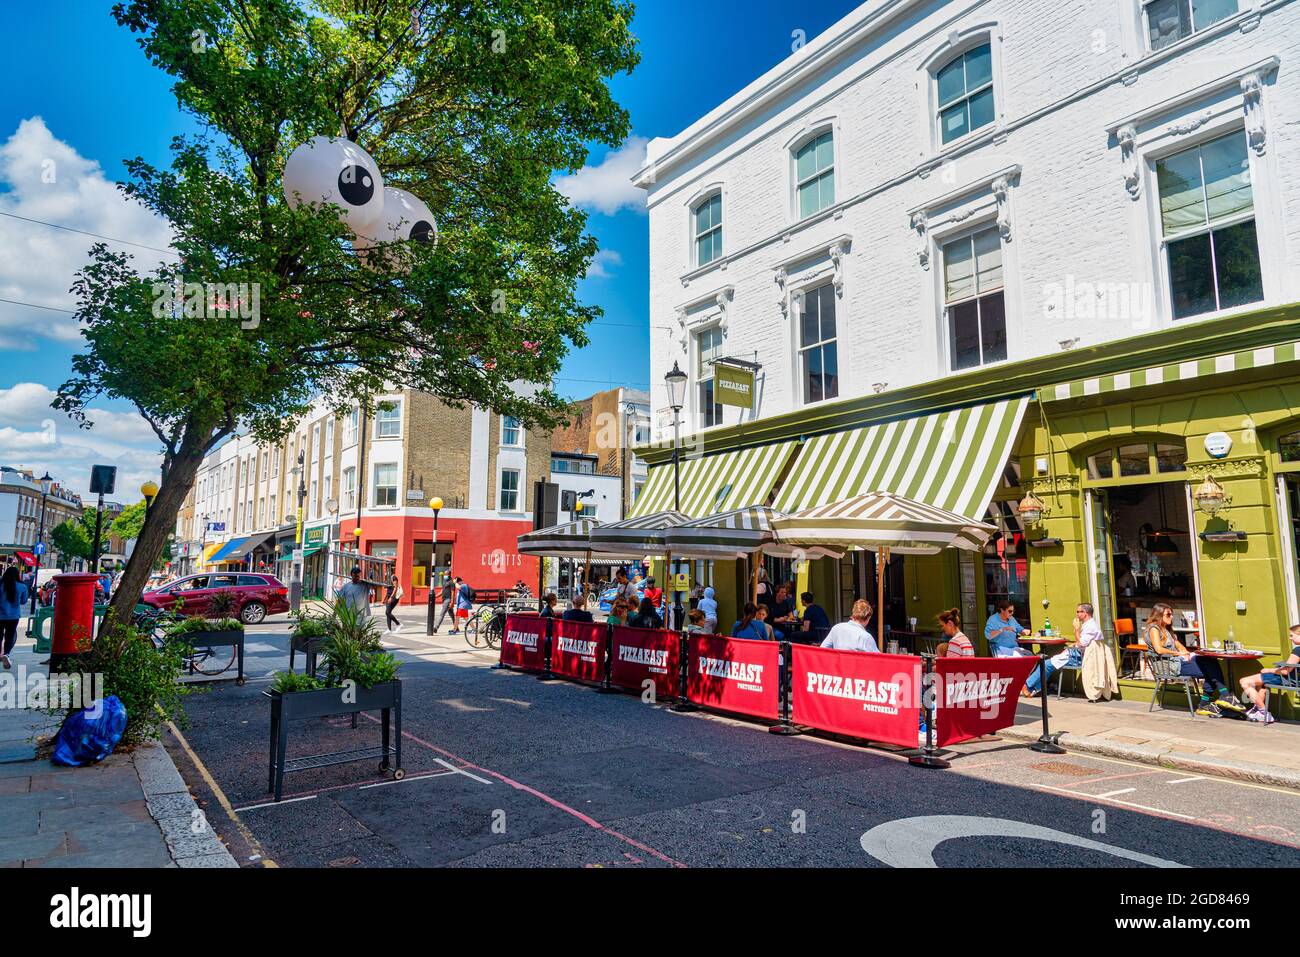 Giant inflatable googly eyes seen on a tree across central London. Part of  Mayor of London Sadiq Khan's #LetsDoLondon Family Fun season, the eyes  popped up in 'eye-conic' spots around the city 